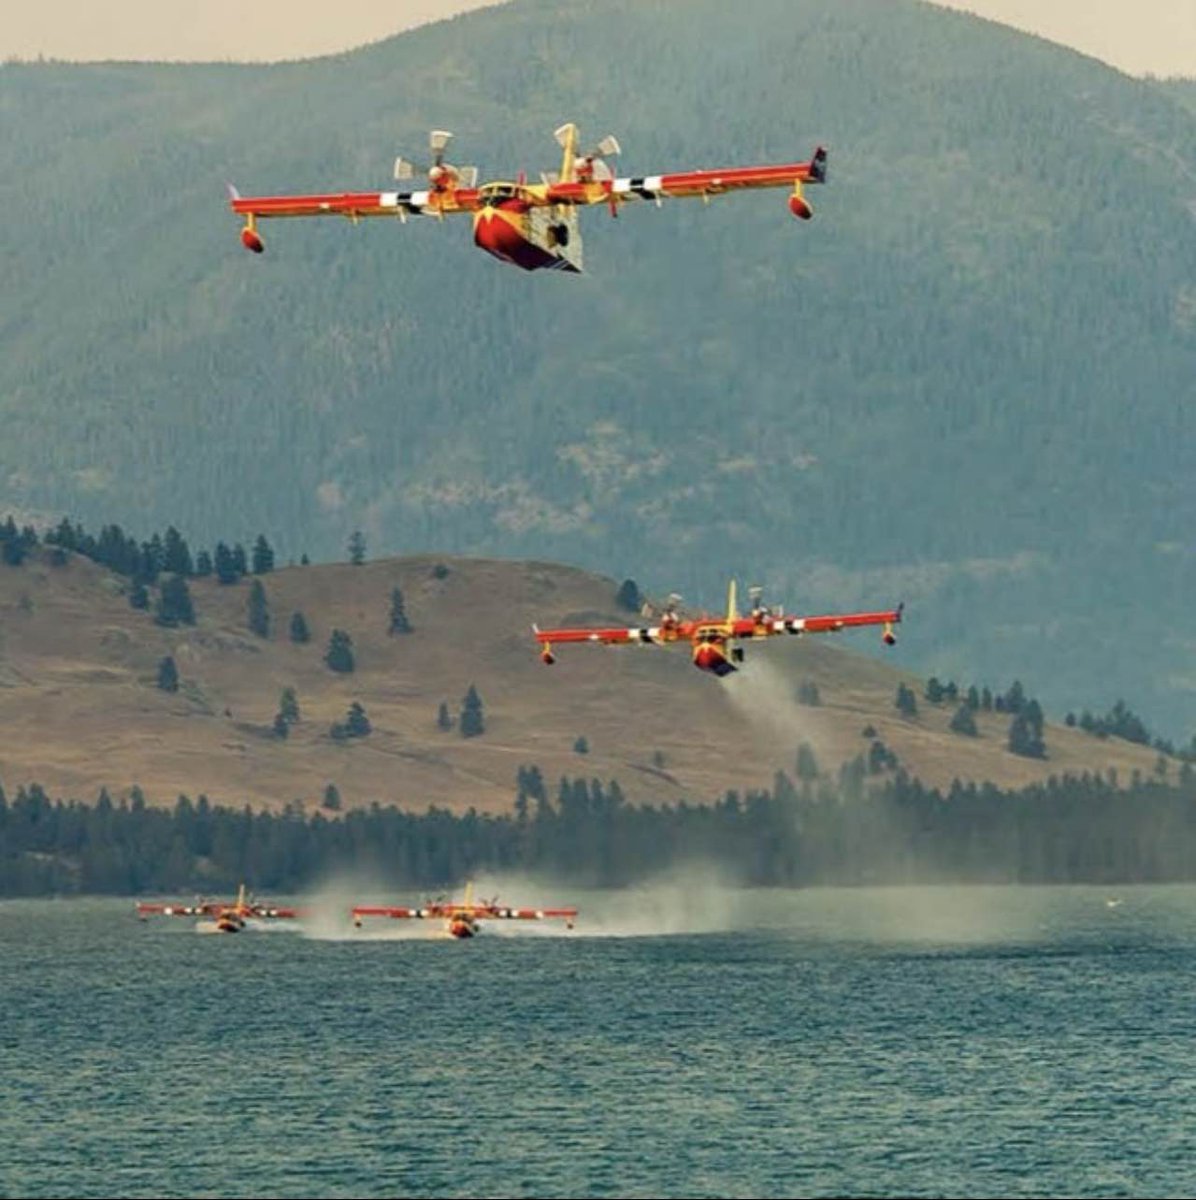 Four of Bridger Aerospace's Scoopers were all activated at once in 2023. Photo by @bridgeraerospace.

Tag us at @aerialfiremag to feature your image on social media and in our print magazine. Email your shots to news@aerialfiremag.com